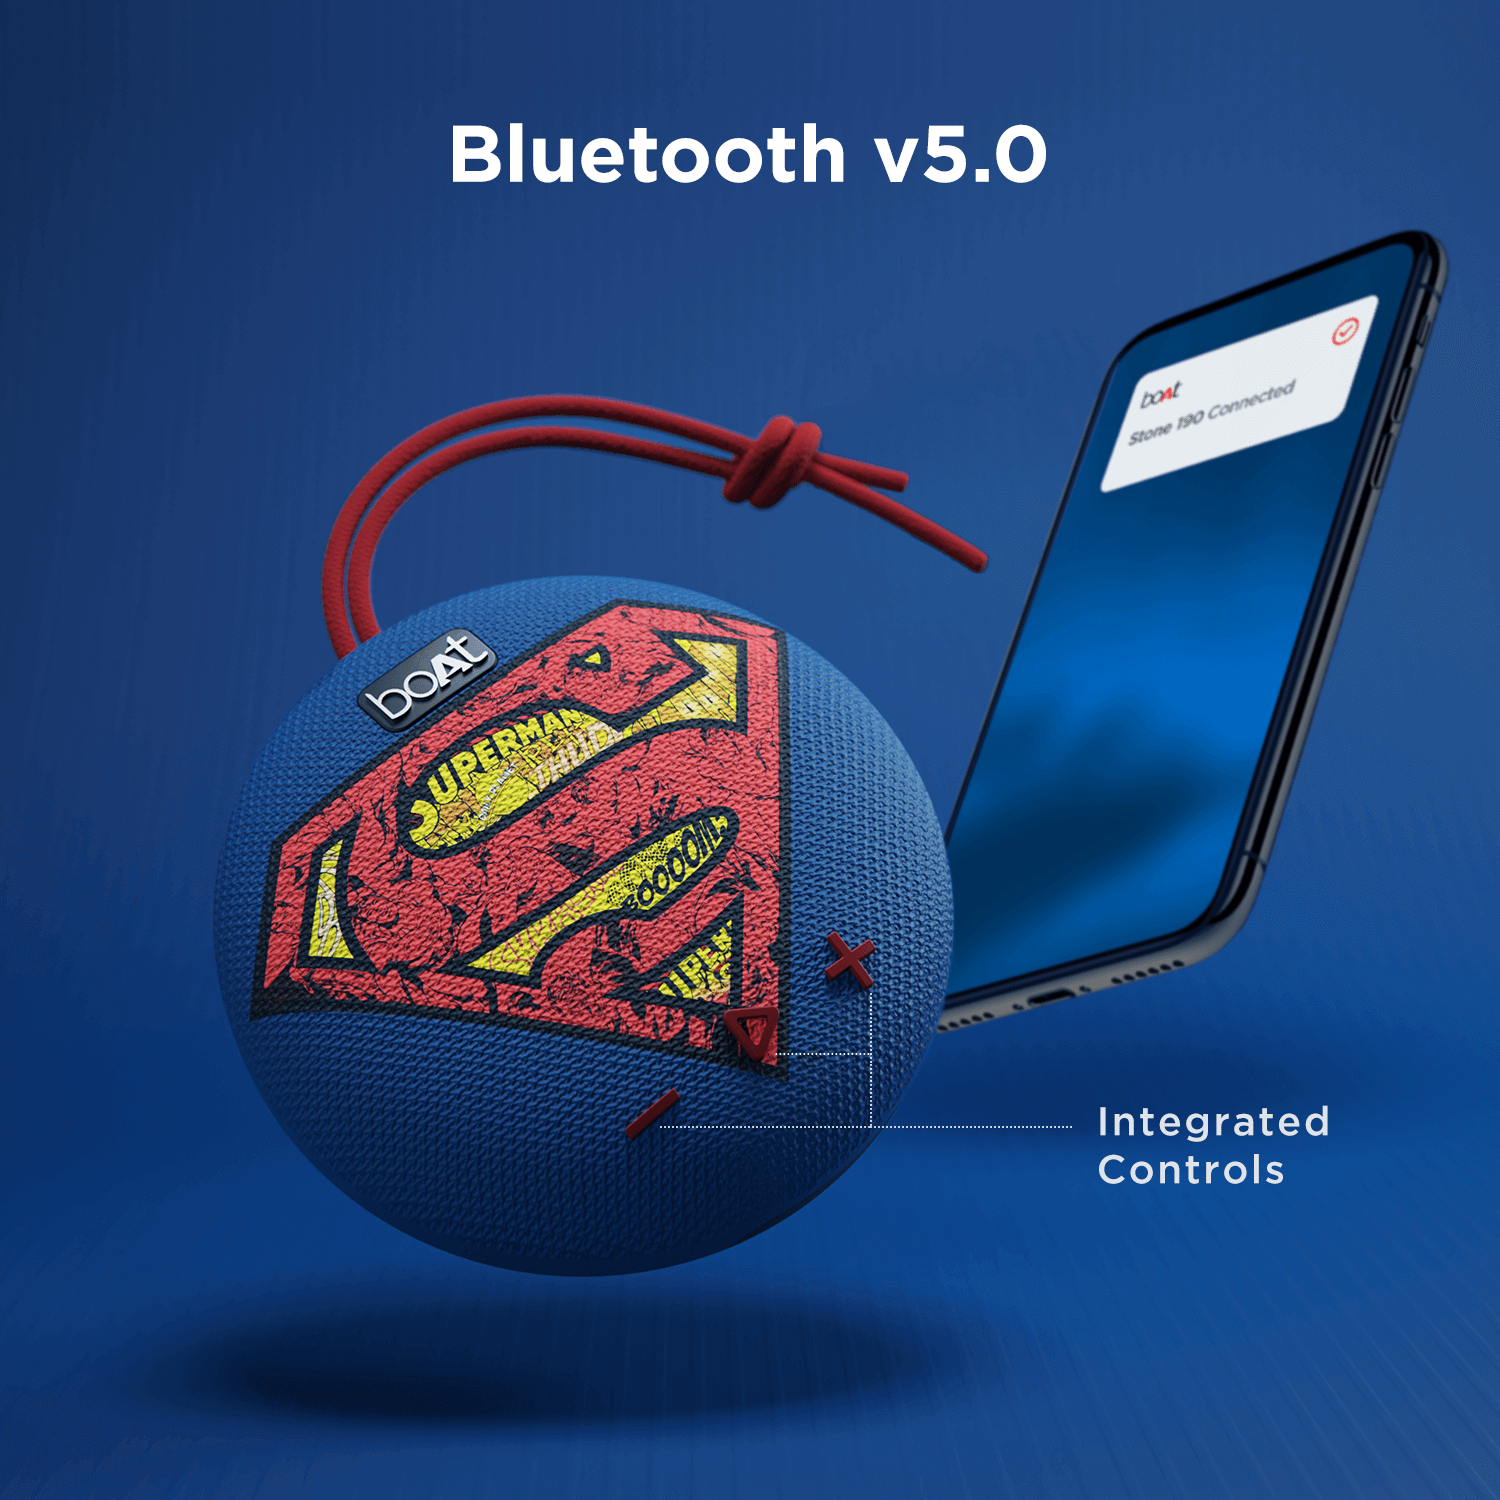 Stone 190 Superman DC edition | Wireless Bluetooth Speaker with 52mm Drivers, Portable & Lightweight, Up to 4 Hours of Playtime